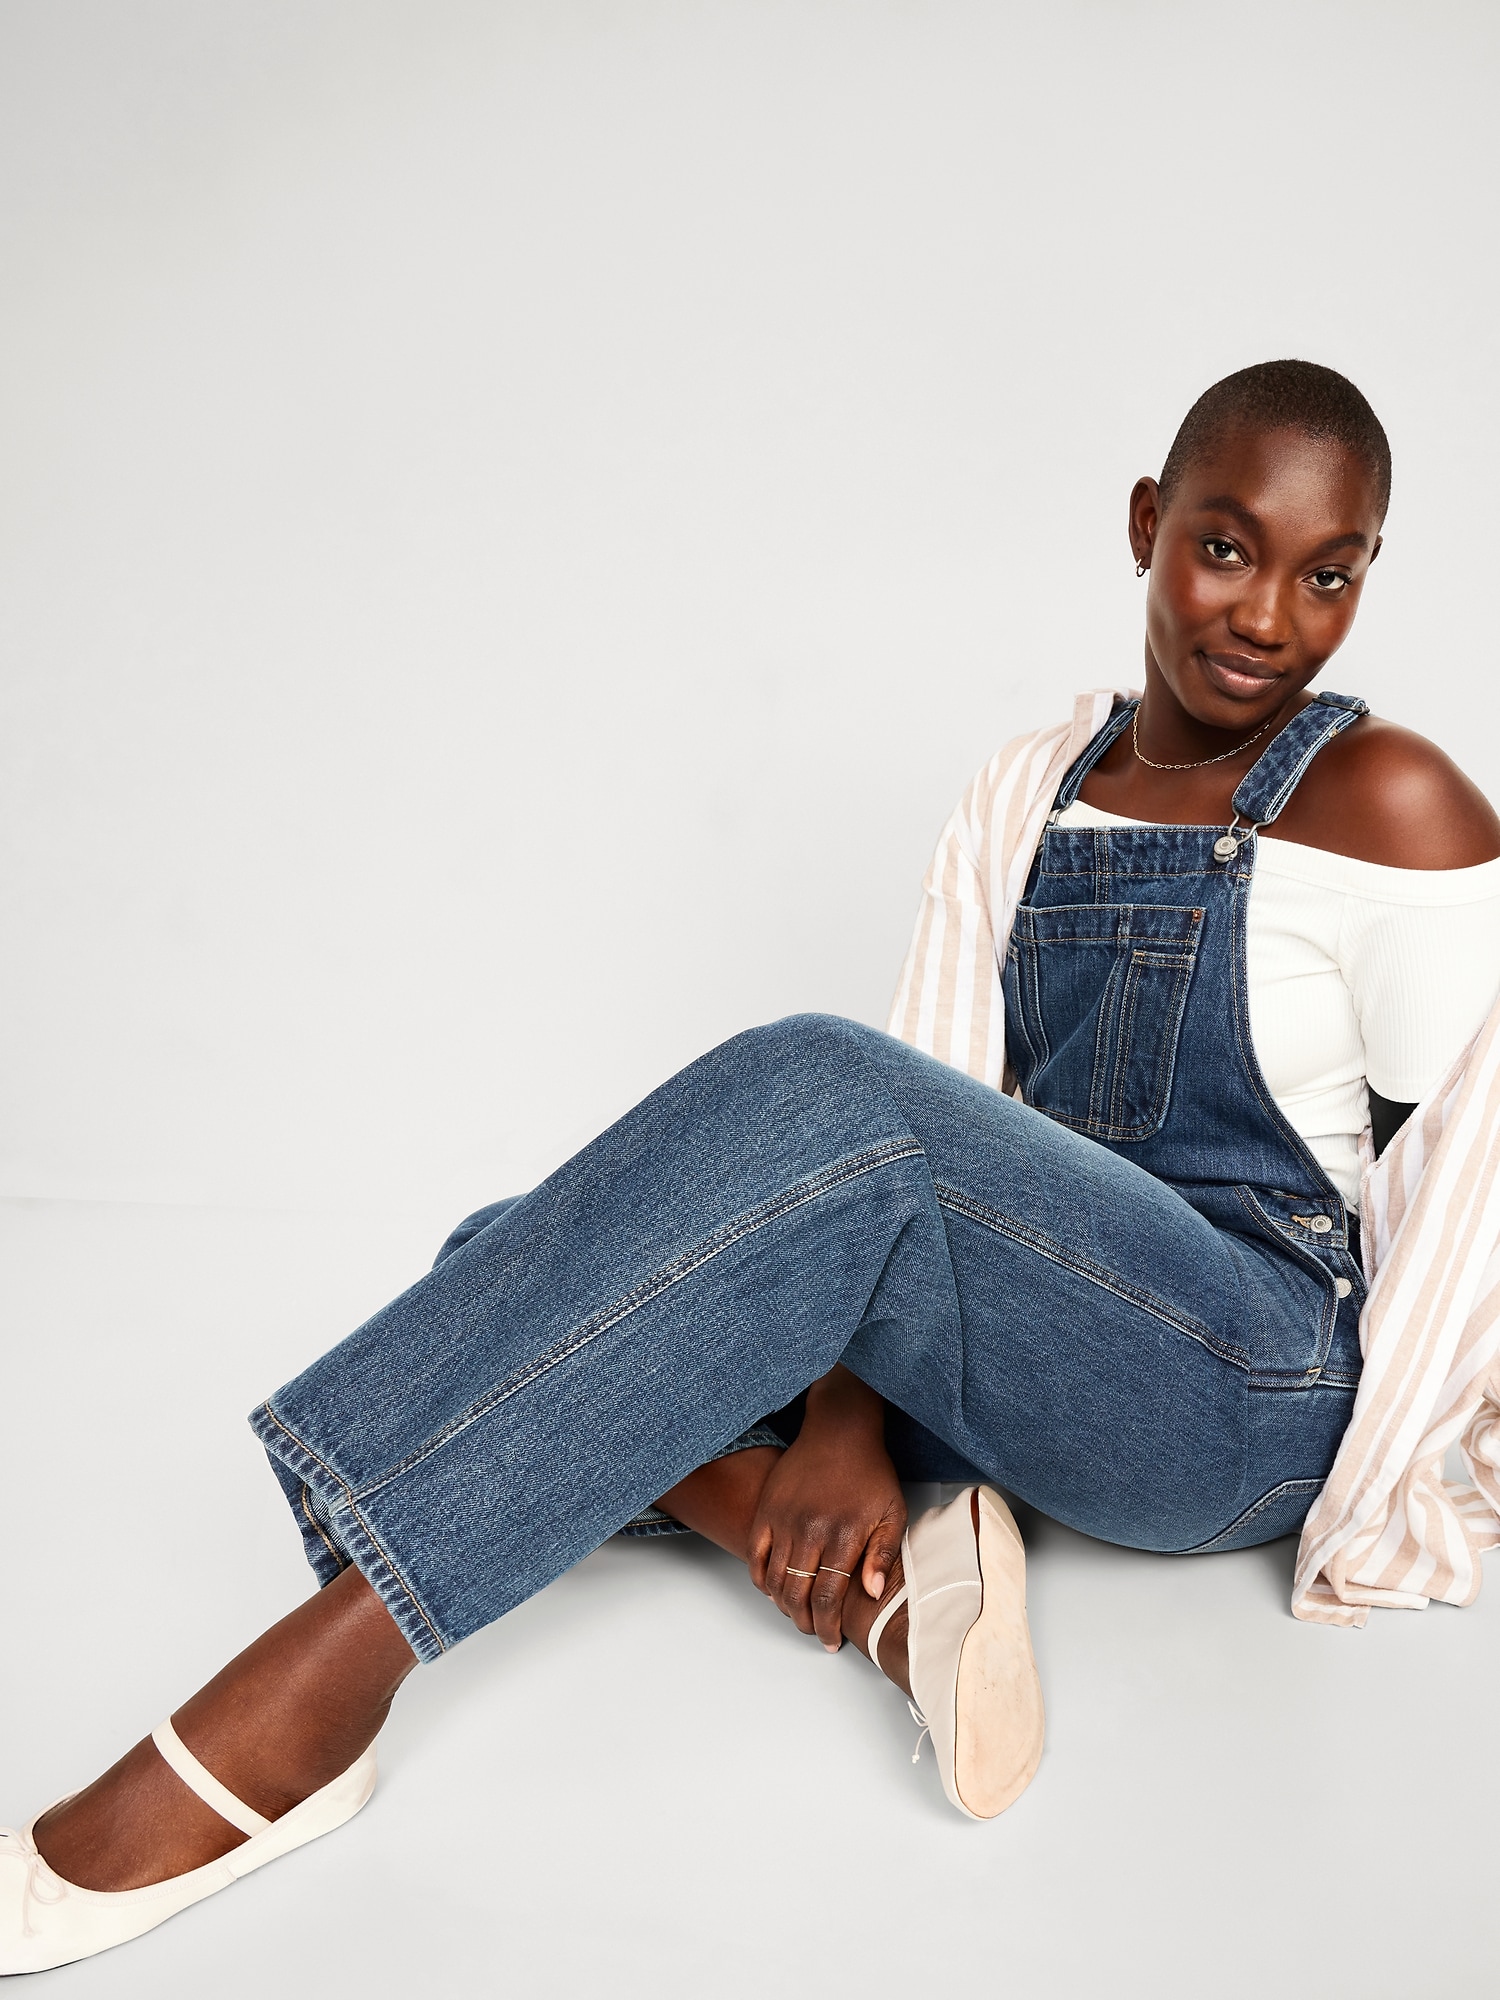 Baggy Wide-Leg Jean Overalls for Women | Old Navy